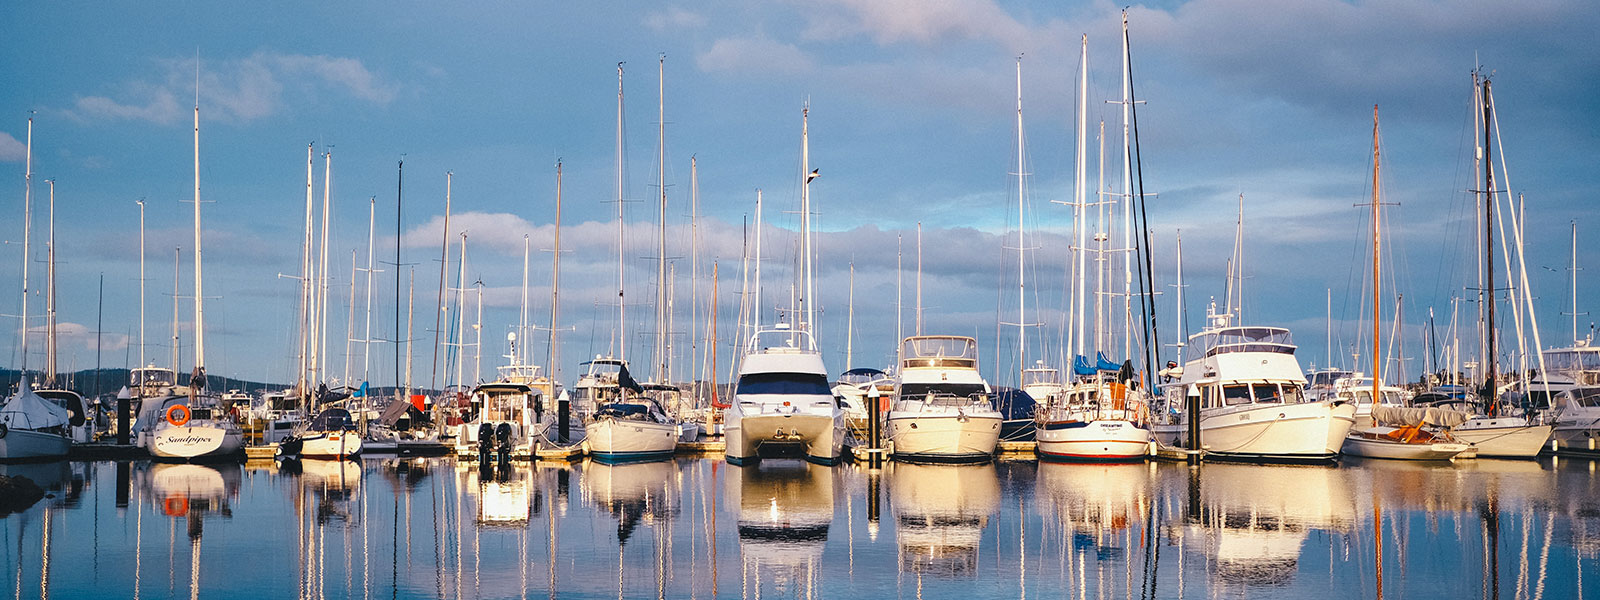 Tradewind Services LLC offers a wide variety of boat, yacht and watercraft documentation and registration services to accommodate both buyers, sellers, and lending institutions.